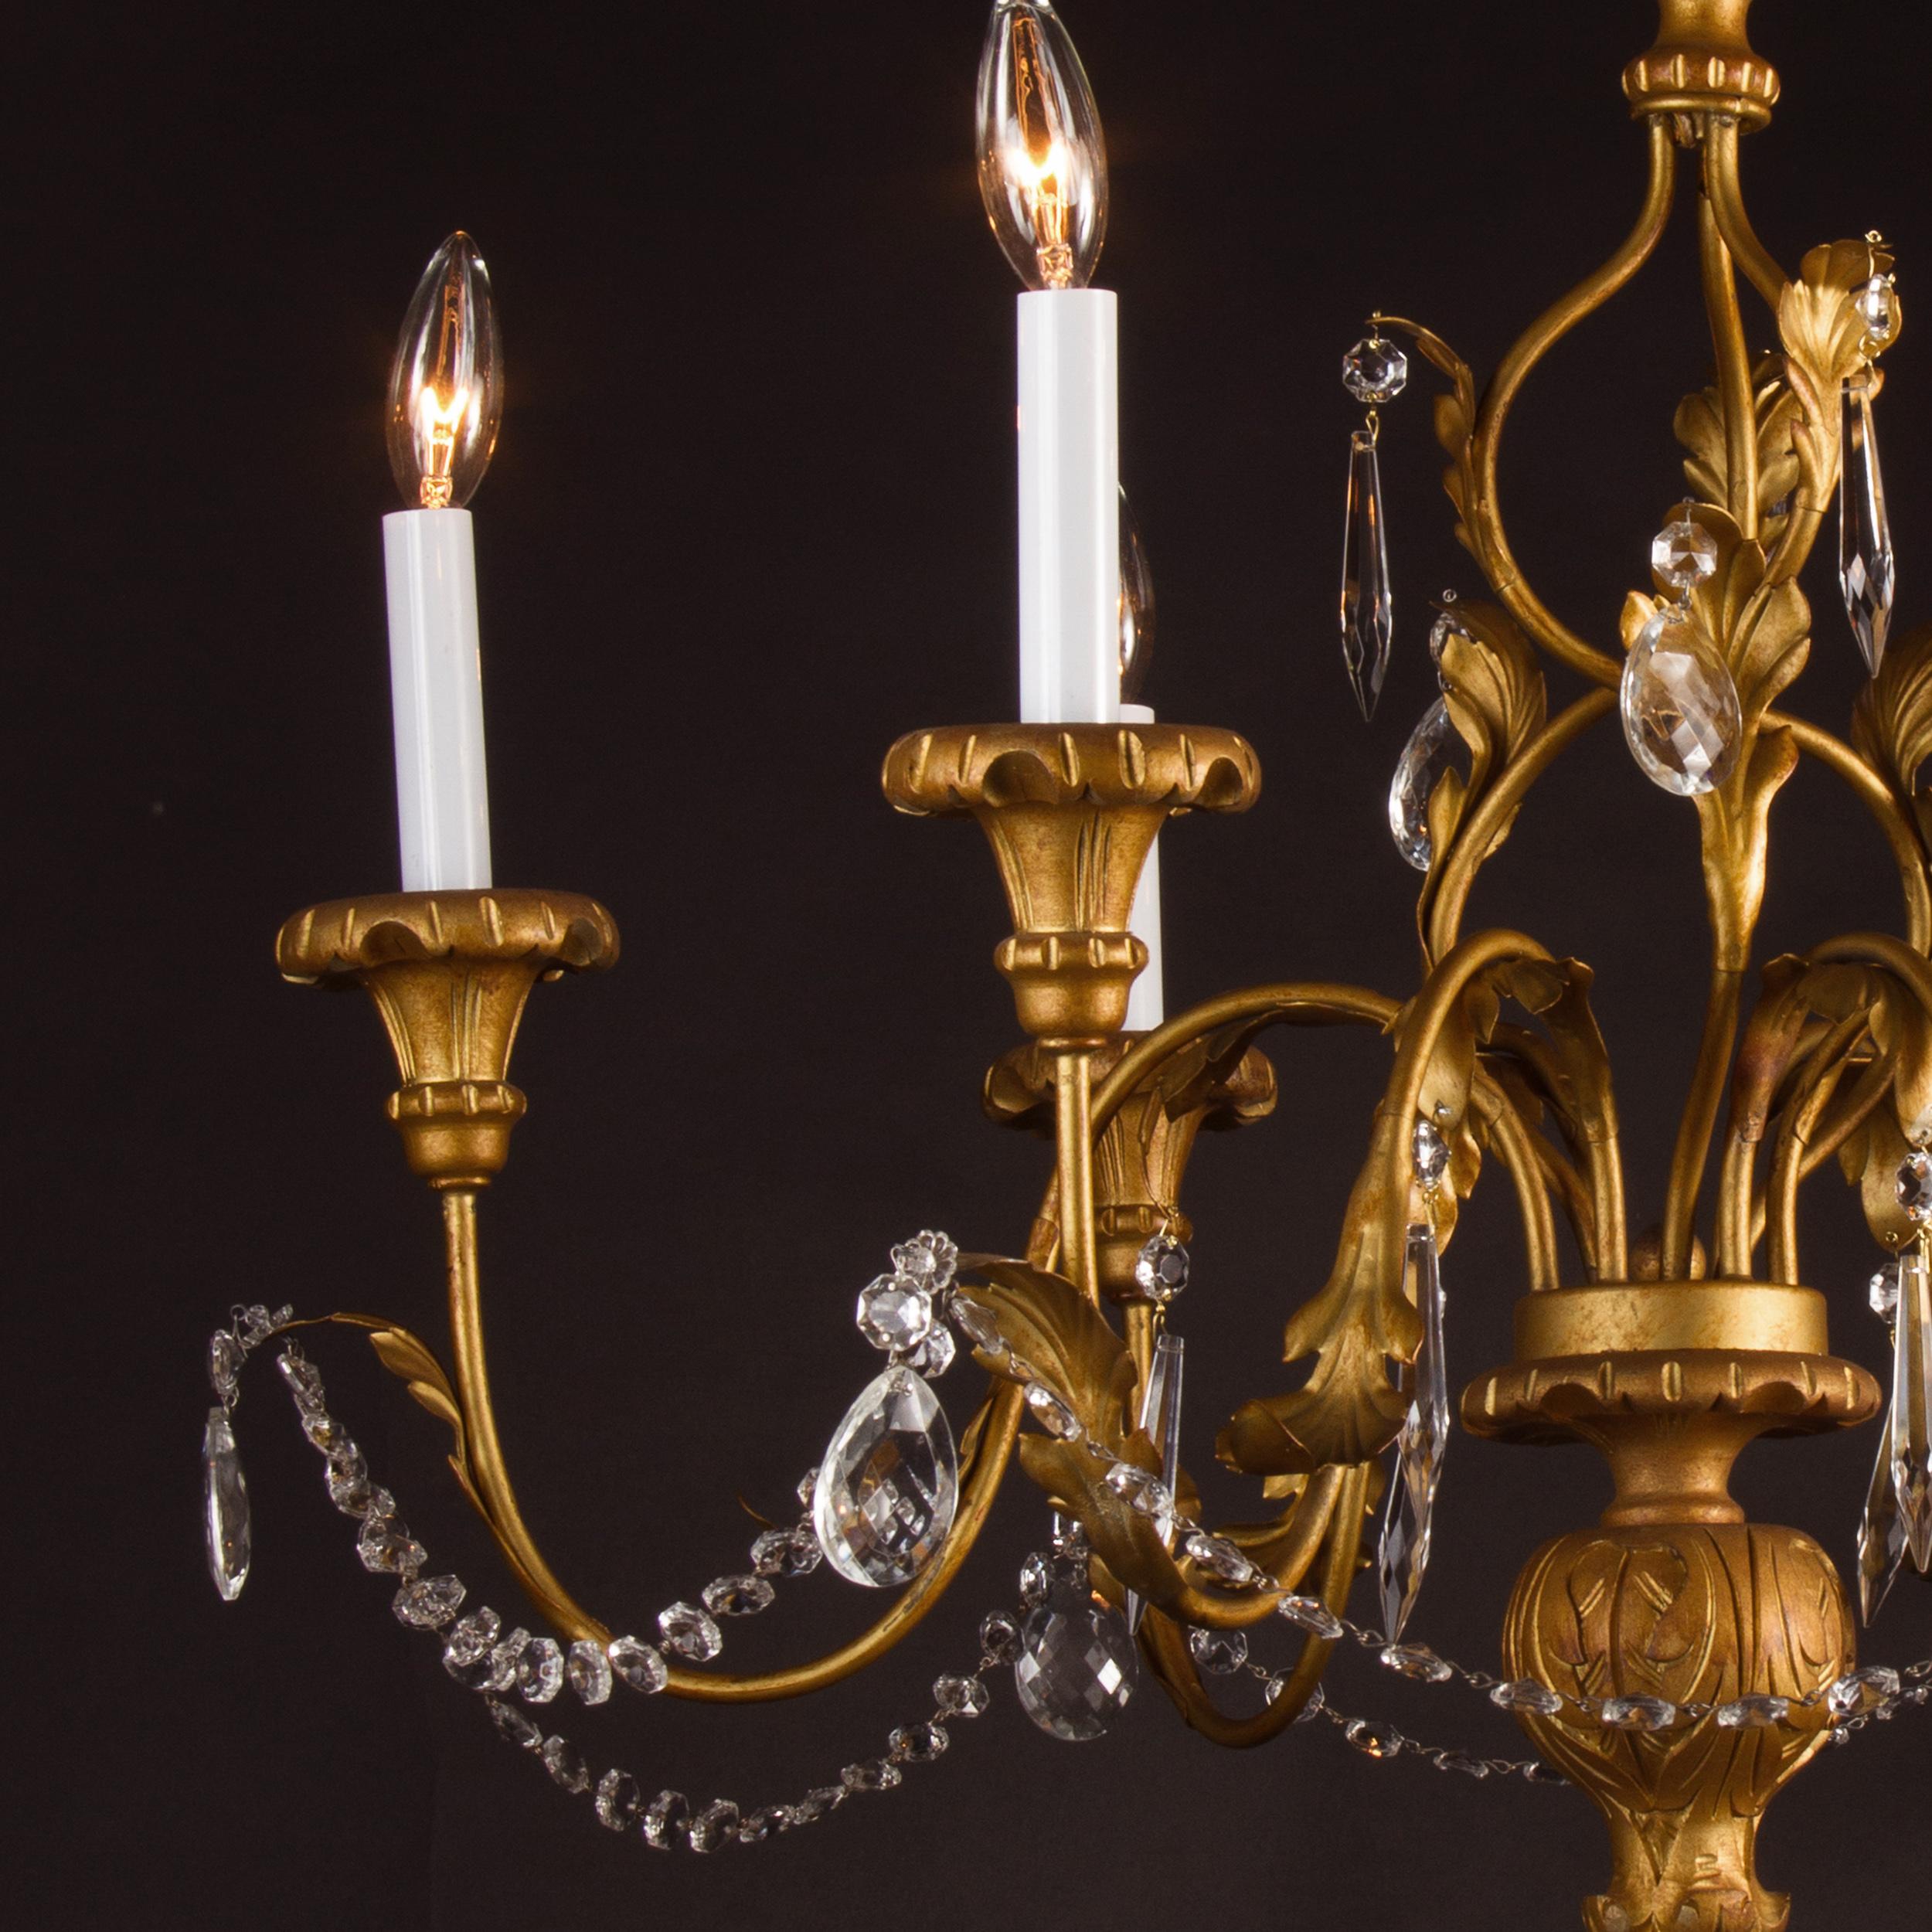 This beautiful Italian chandelier is made of gilded (gold leaf covered) Iron, hand painted wood, crytsal and tole. The piece dates back to the mid-20th century and features a lovely spiral aesthetic along its center stem. Decorative furling leaves